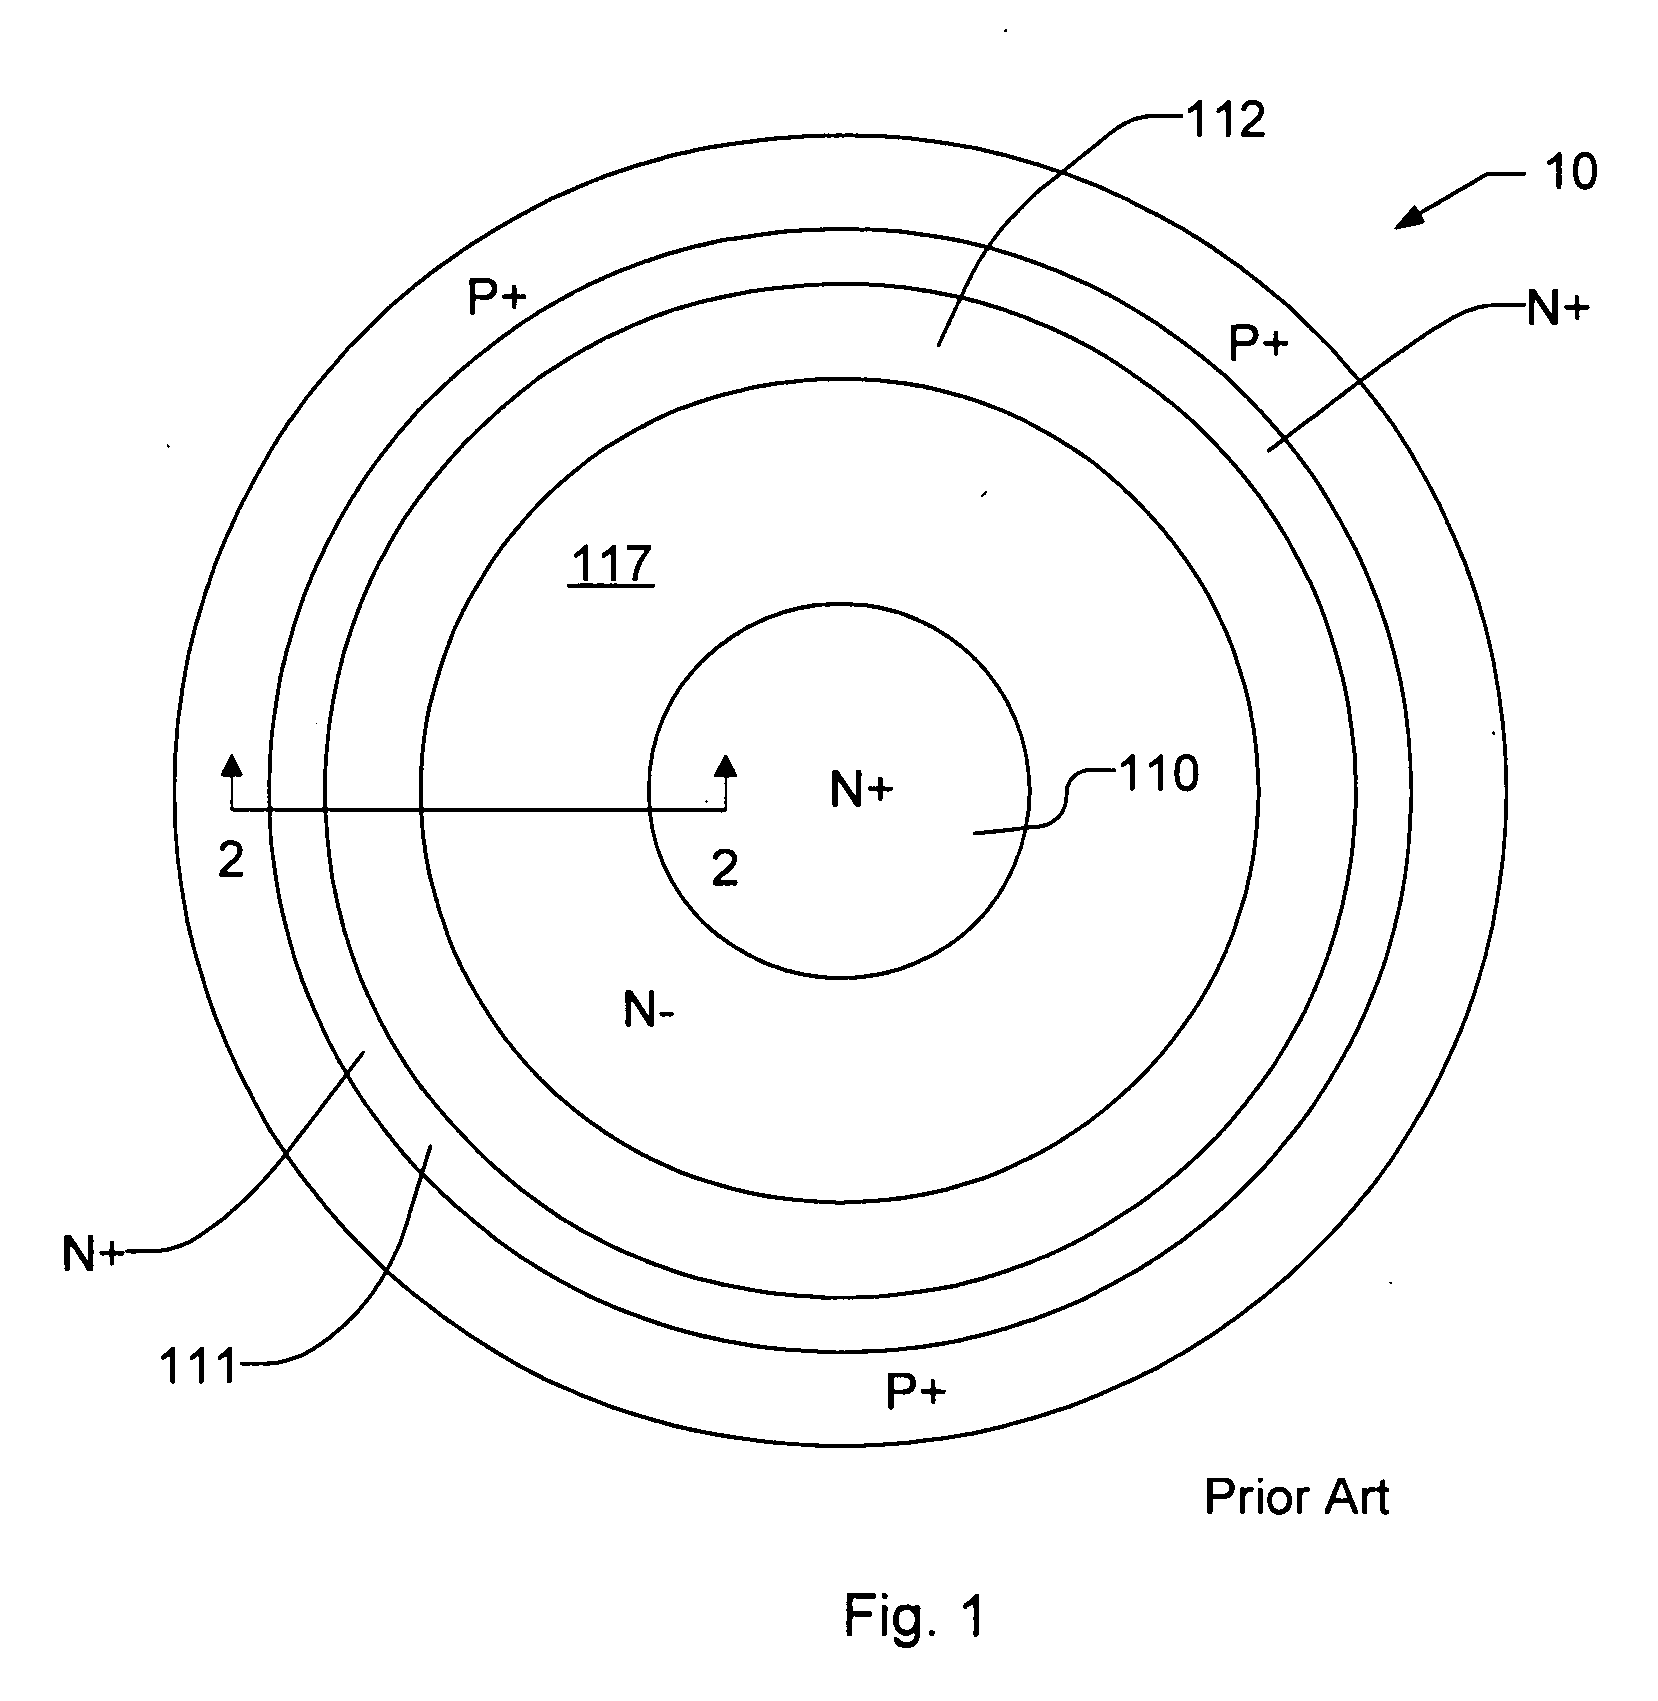 Method of fabricating high voltage semiconductor devices with JFET regions containing dielectrically isolated junctions